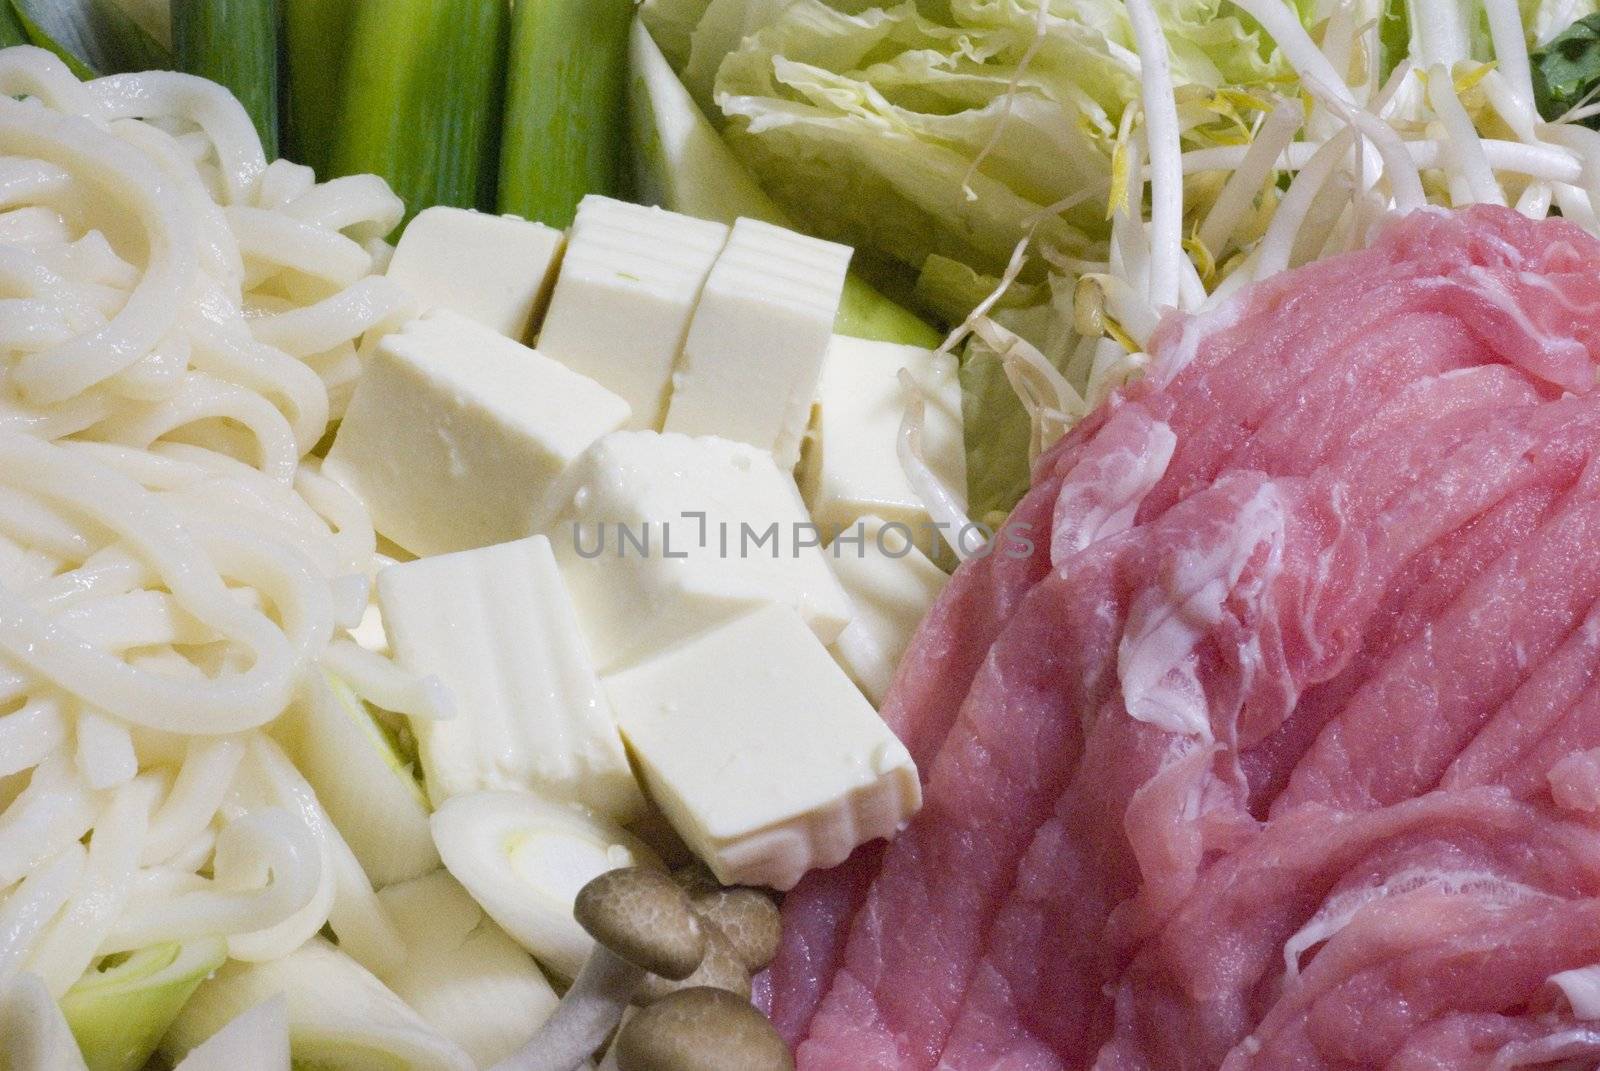 Noodles, tofu, pork and other ingredients spread out prepared for shabu shabu. white and red horizontal